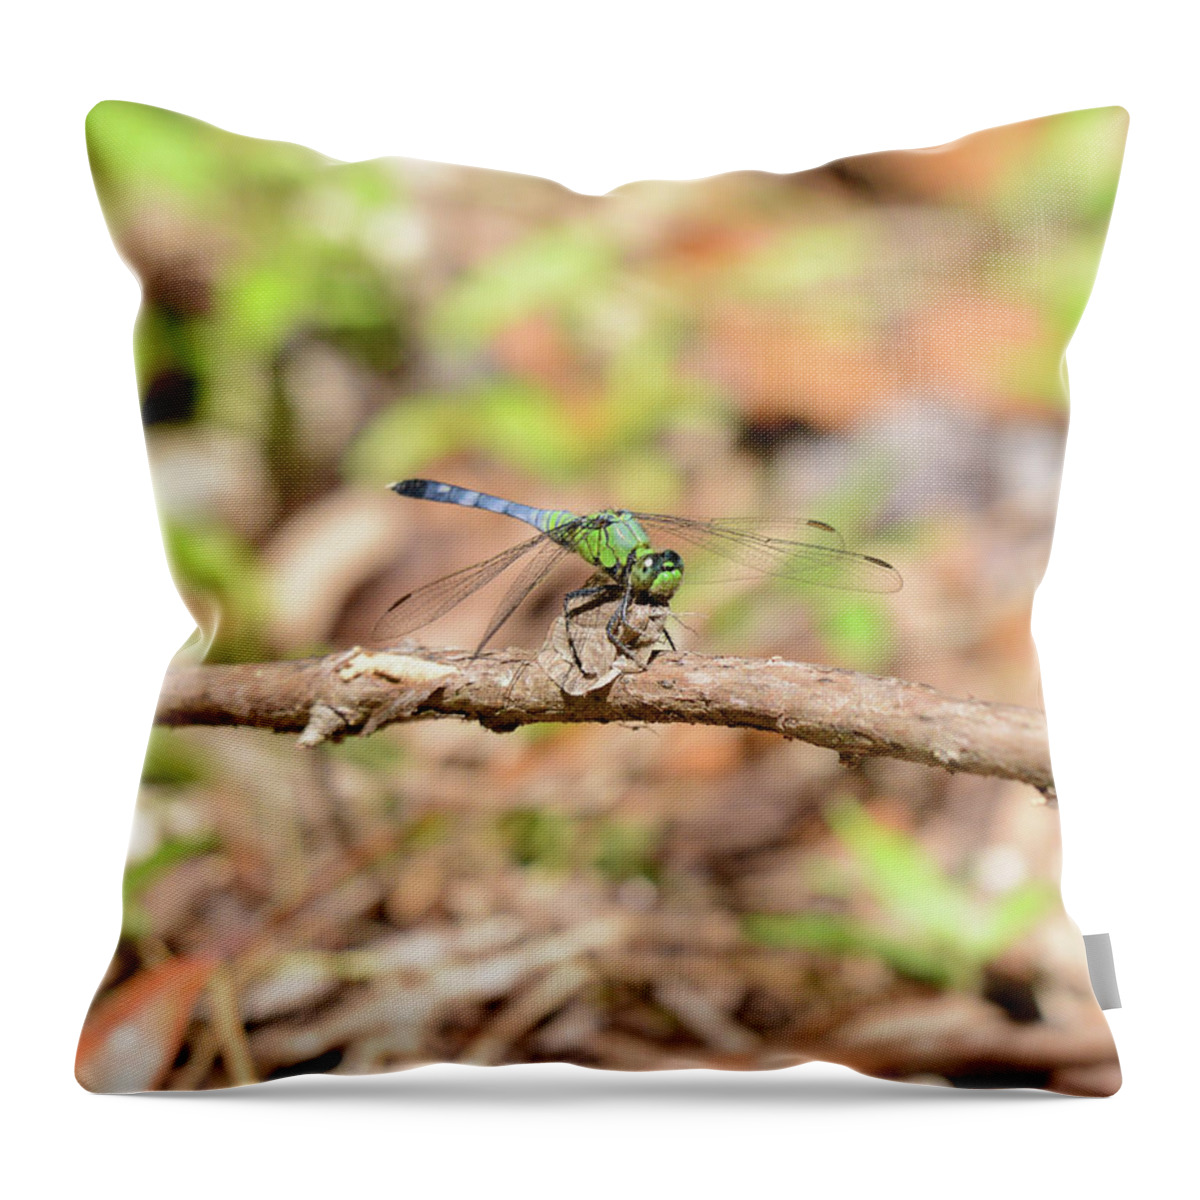  Throw Pillow featuring the photograph Dragon 3 by David Armstrong